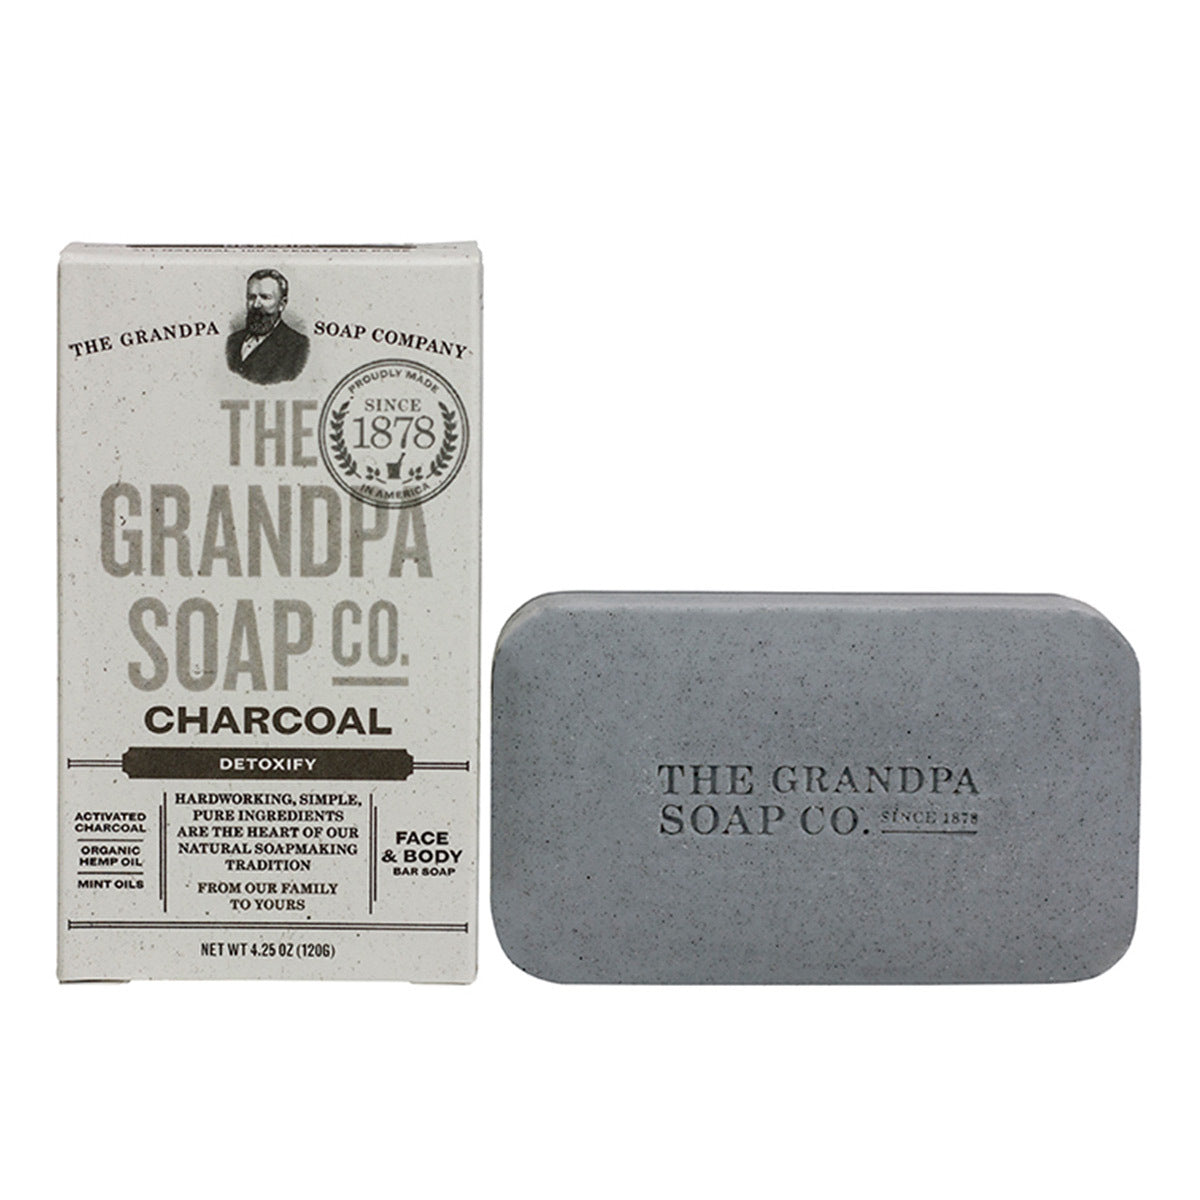 Primary image of Charcoal Bar Soap